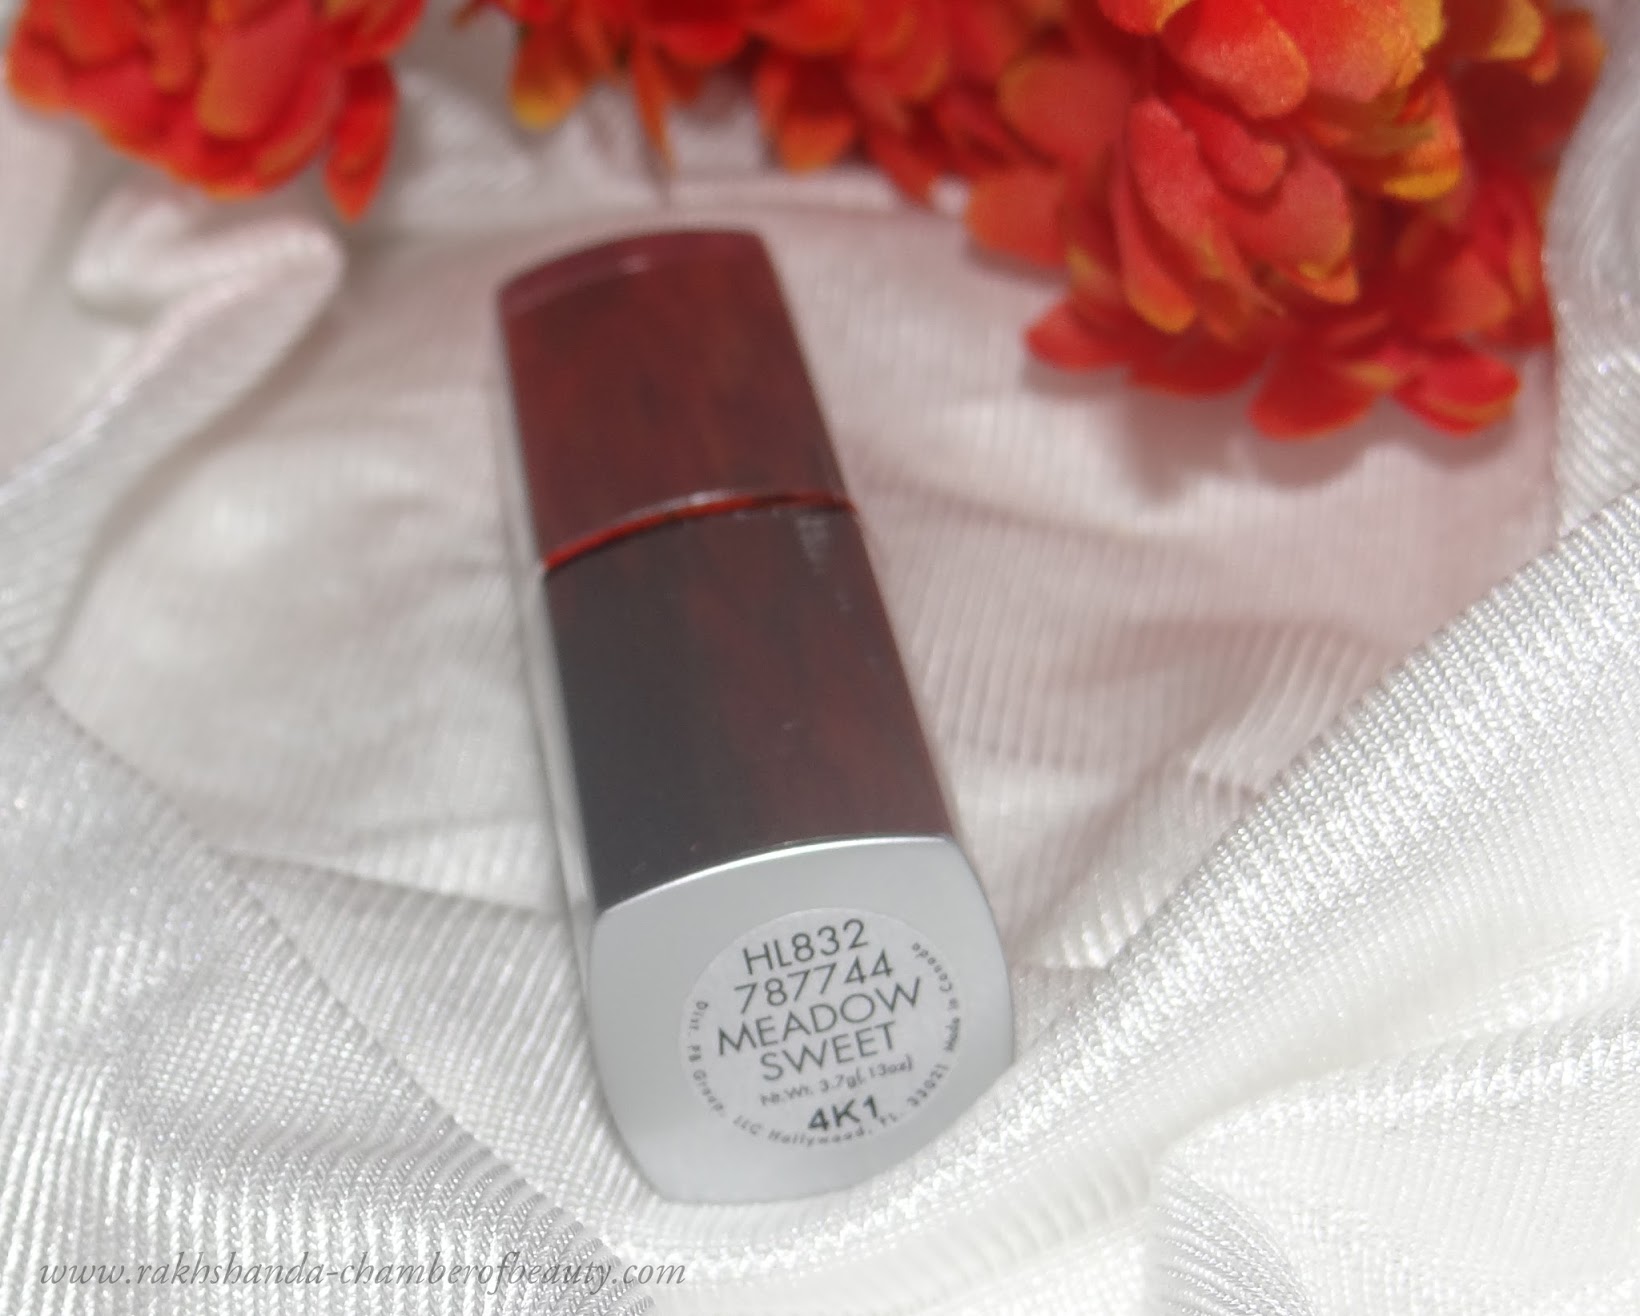 Palladio Meadow Sweet lipstick-review, swatches, Palladio Lipstick, creamy, herbal, Palladio Herbal Lipstick review, Indian beauty blogger, muted soft rose pink, muddy pink, chamber of beauty, Indian makeup blog, lipstick, nude pink lipstick review, nude lips, Palladio Meadow Sweet lipstick